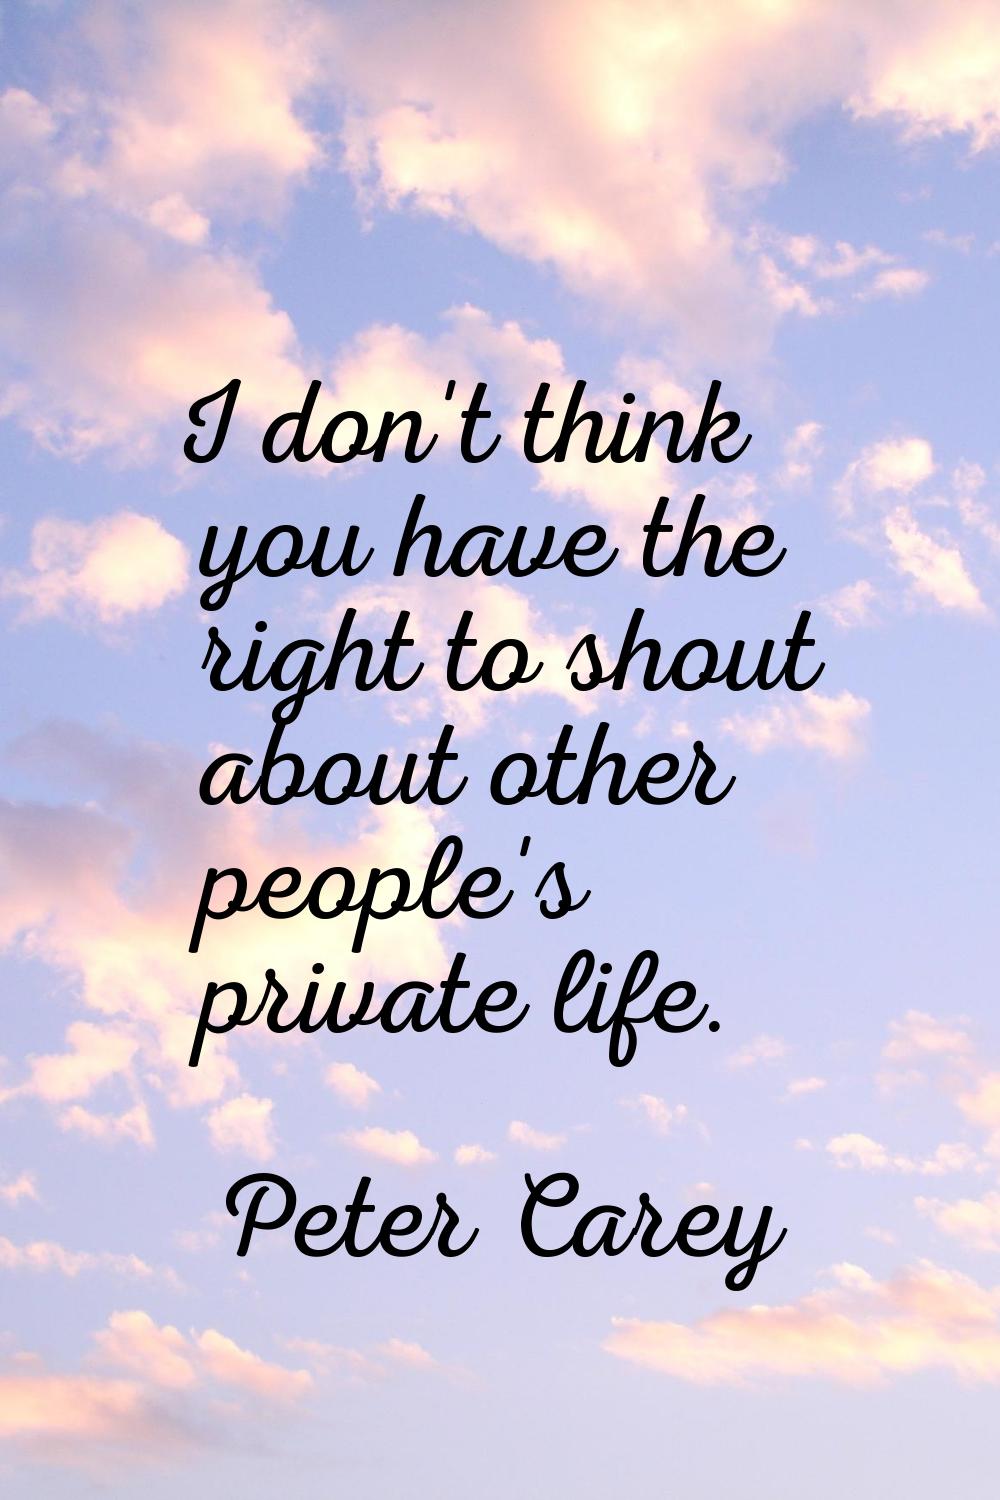 I don't think you have the right to shout about other people's private life.